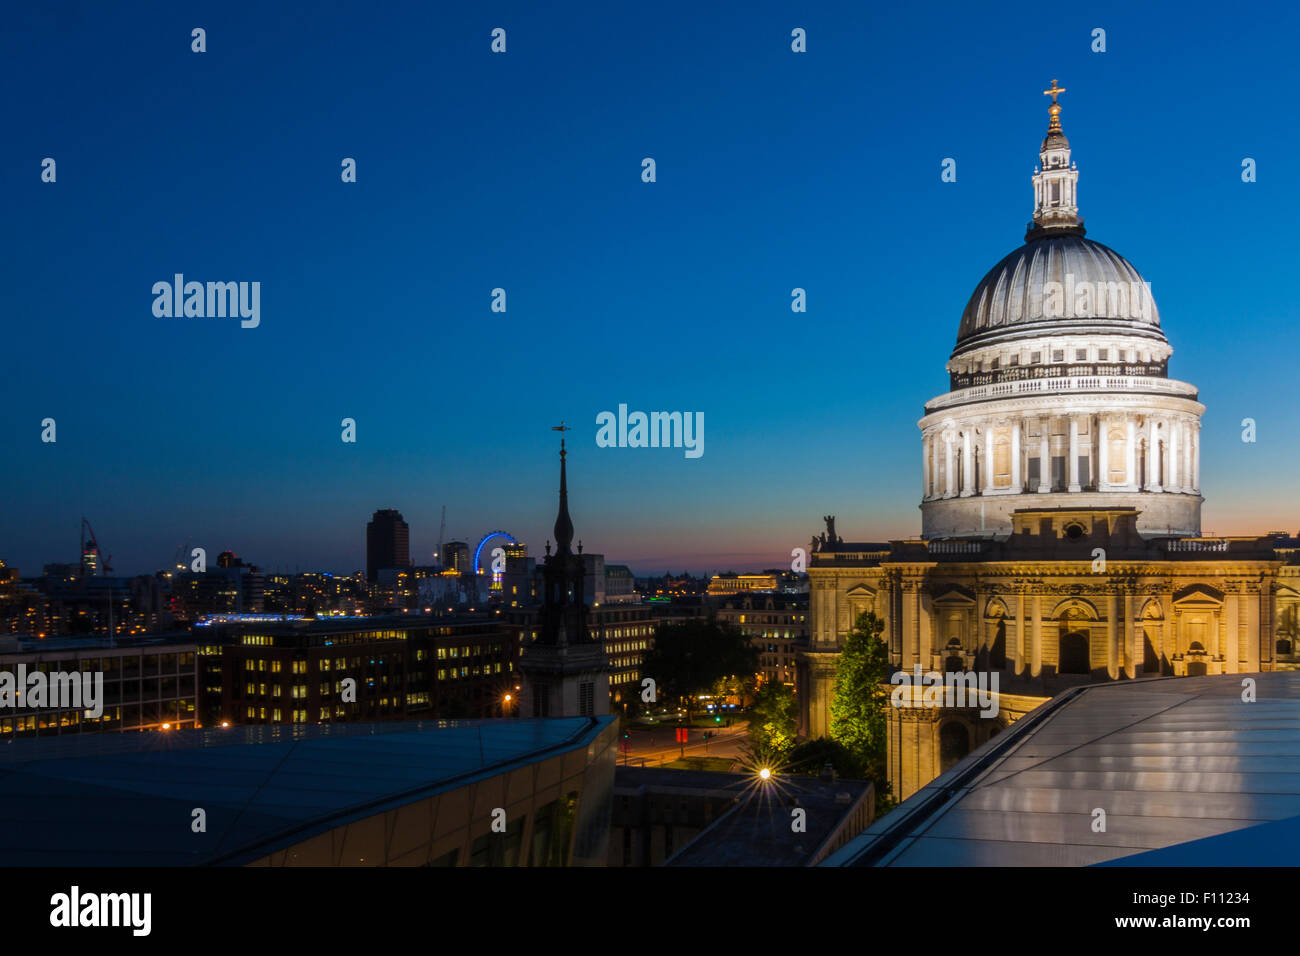 St Paul's Cathedral from One New Change shopping center rooftop, London, England, United Kingdom Stock Photo